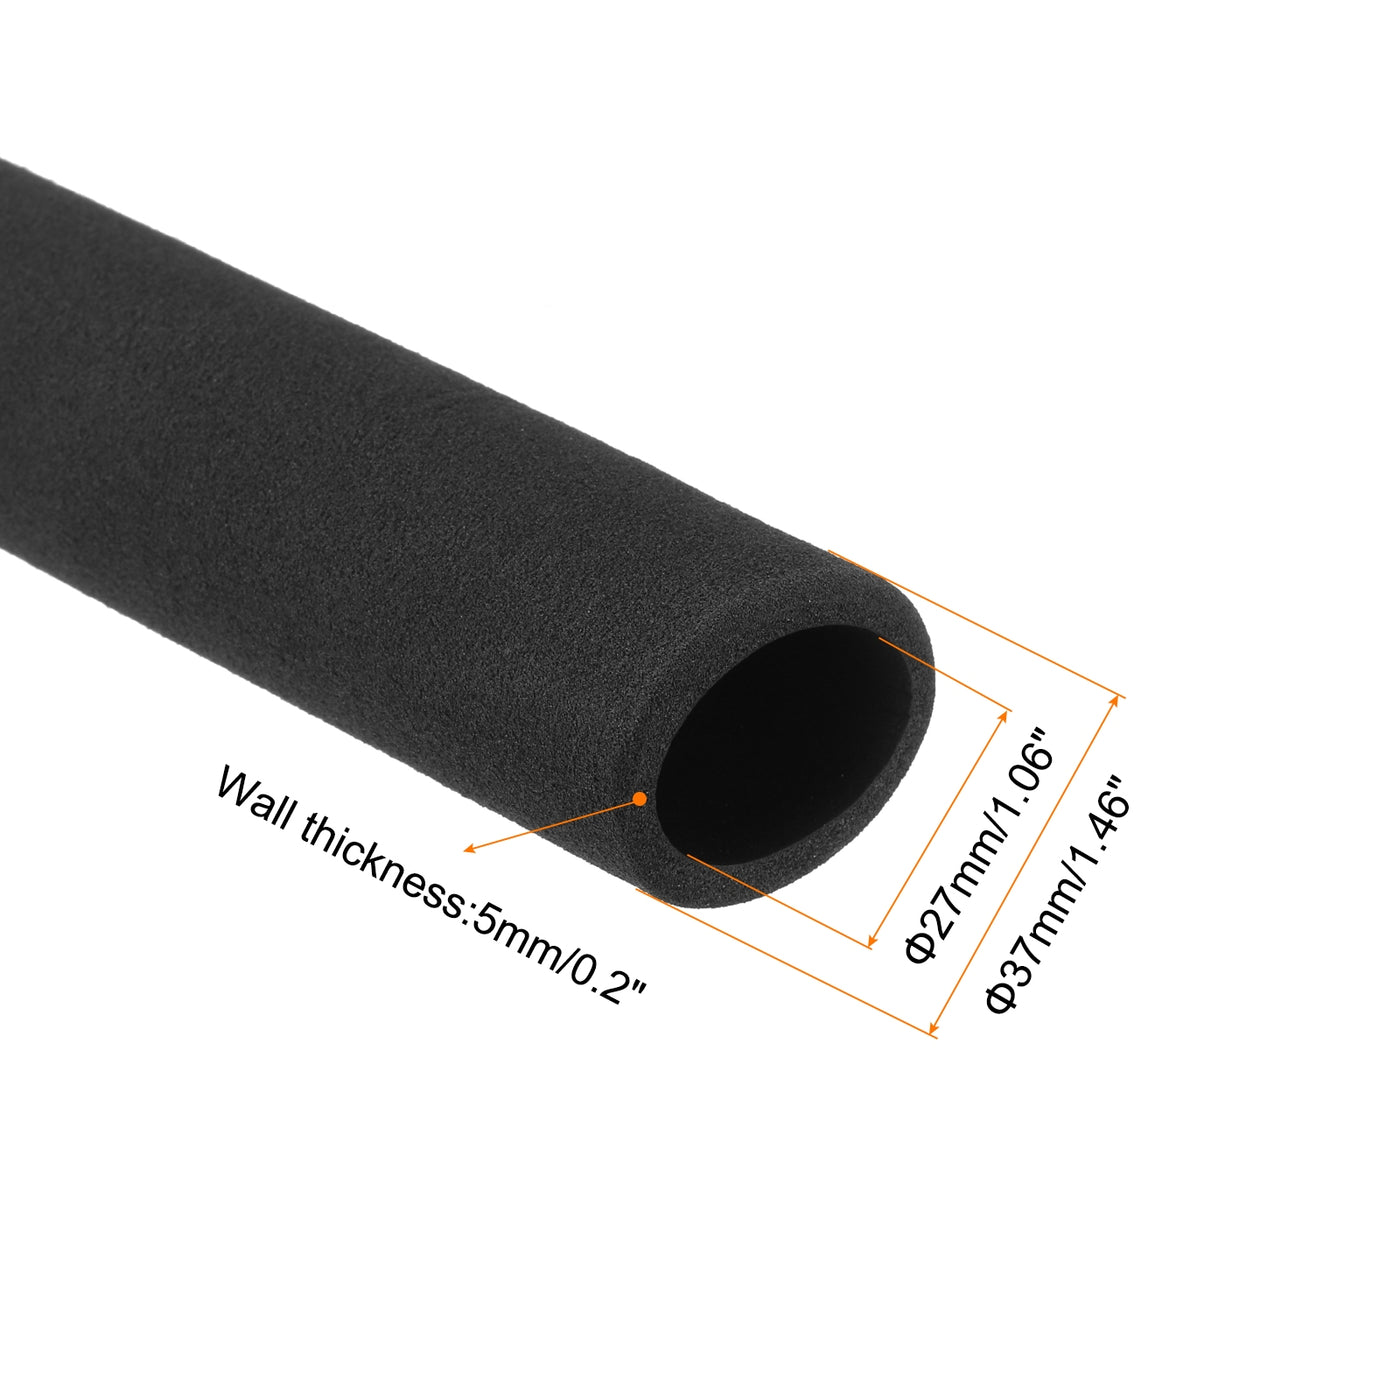 uxcell Uxcell Pipe Insulation Tube Foam Tubing for Handle Grip Support 27mm ID 37mm OD 195mm Heat Preservation Black